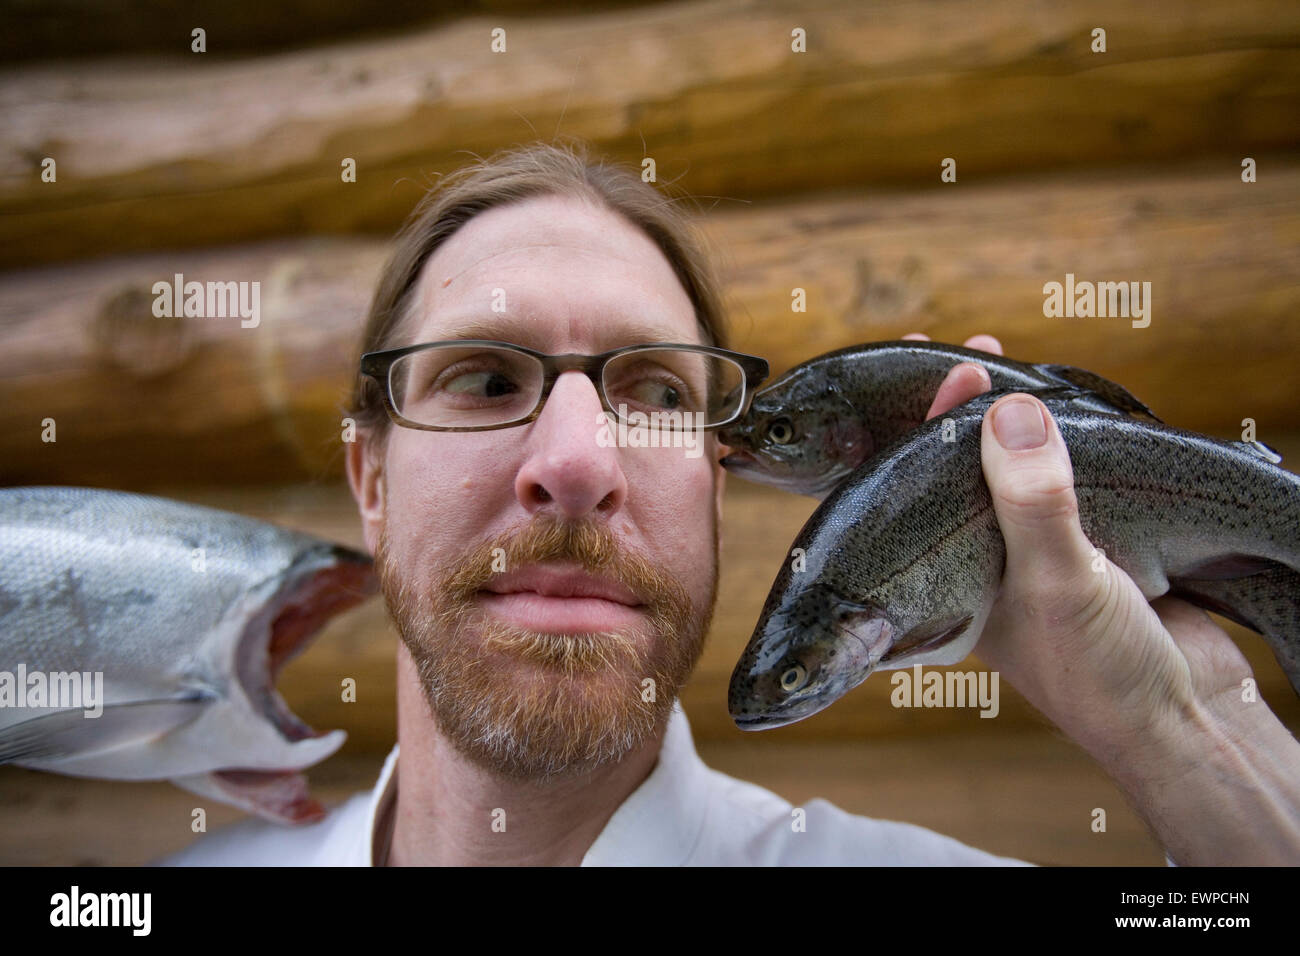 a Chef poses for a silly portrait with some Fish. Stock Photo